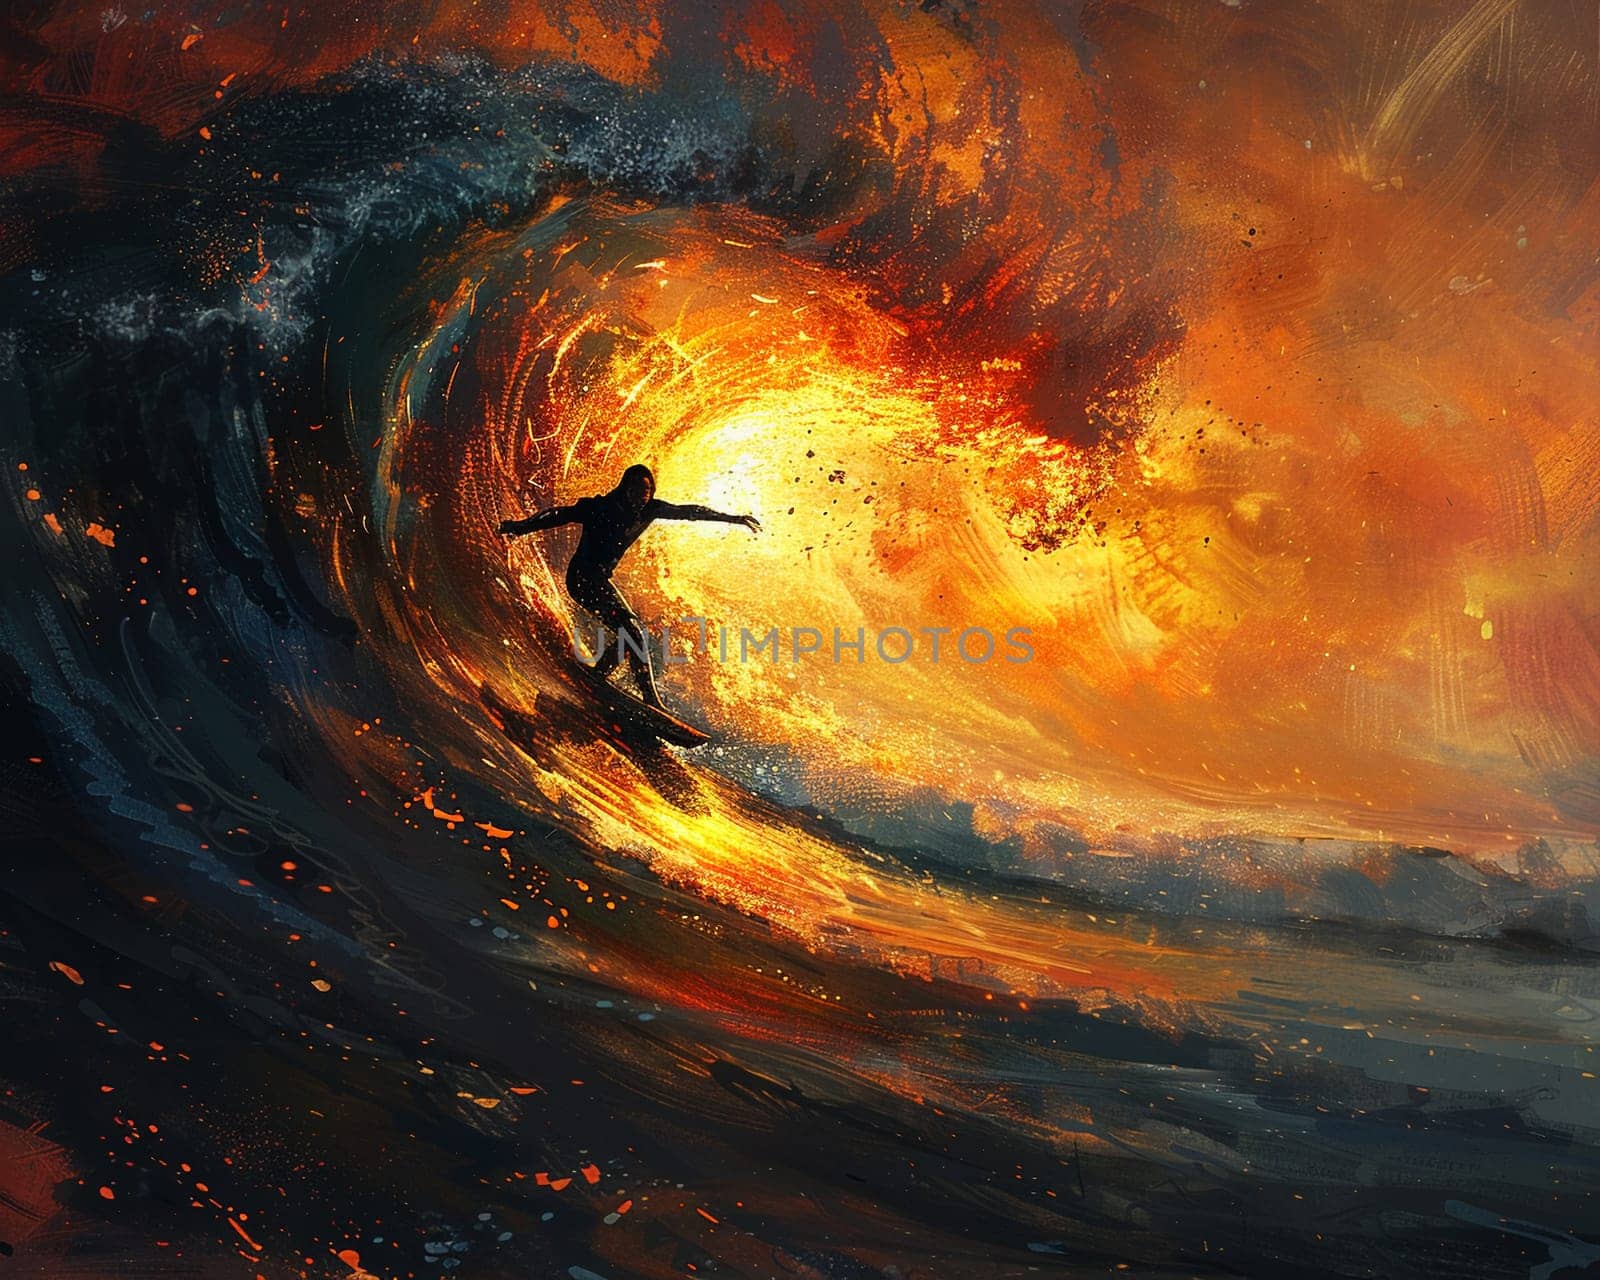 Surfer catching a wave at sunrise, embodying freedom and adventure.